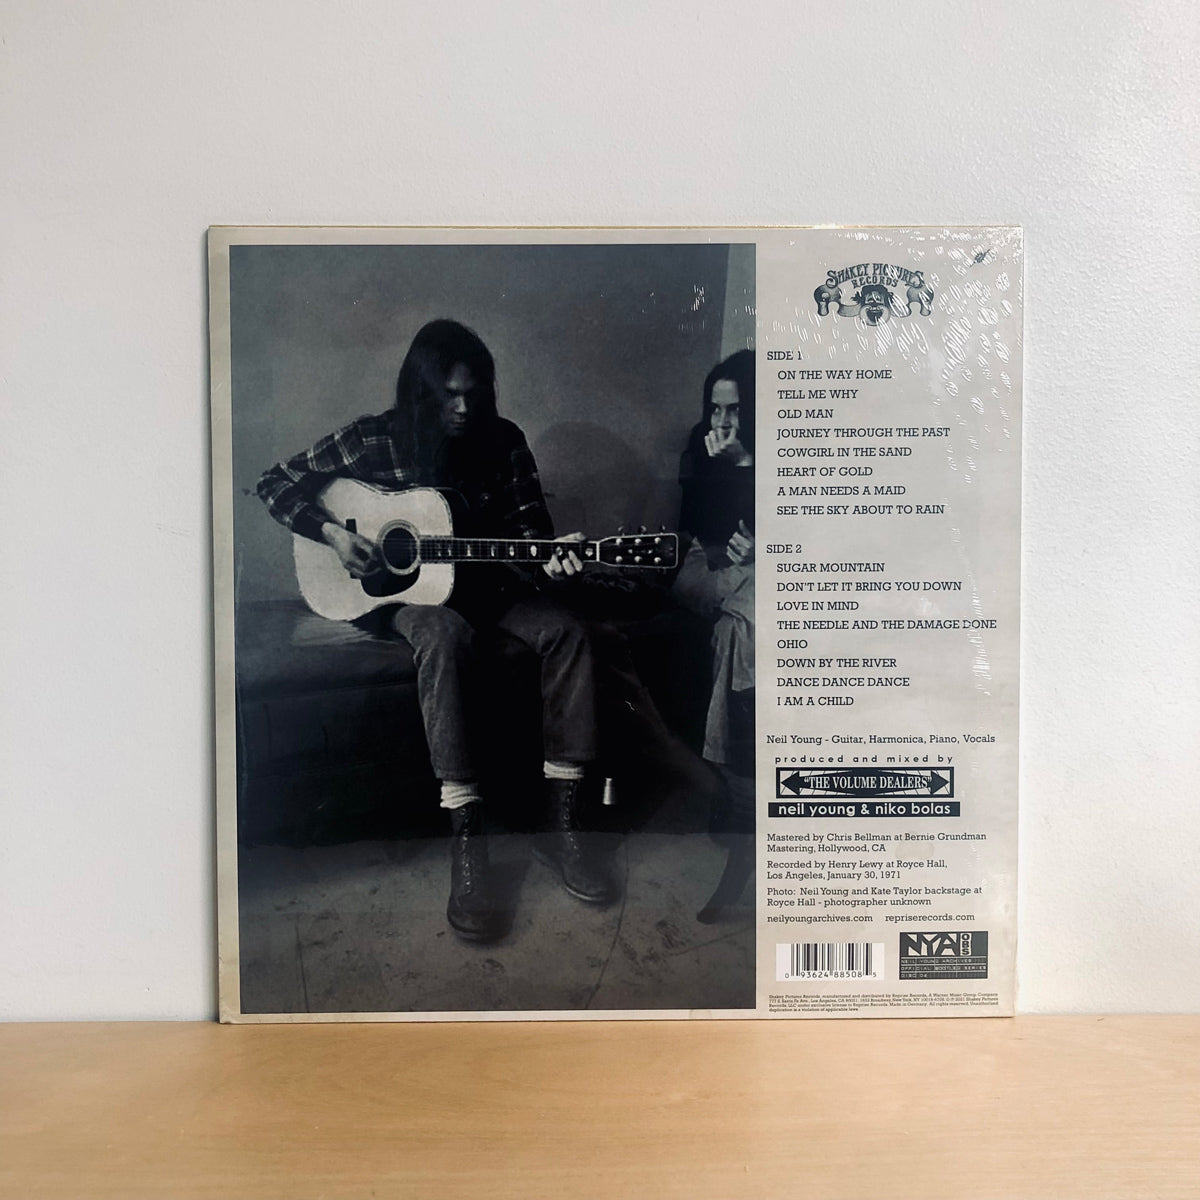 Neil Young - Royce Hall 1971. LP